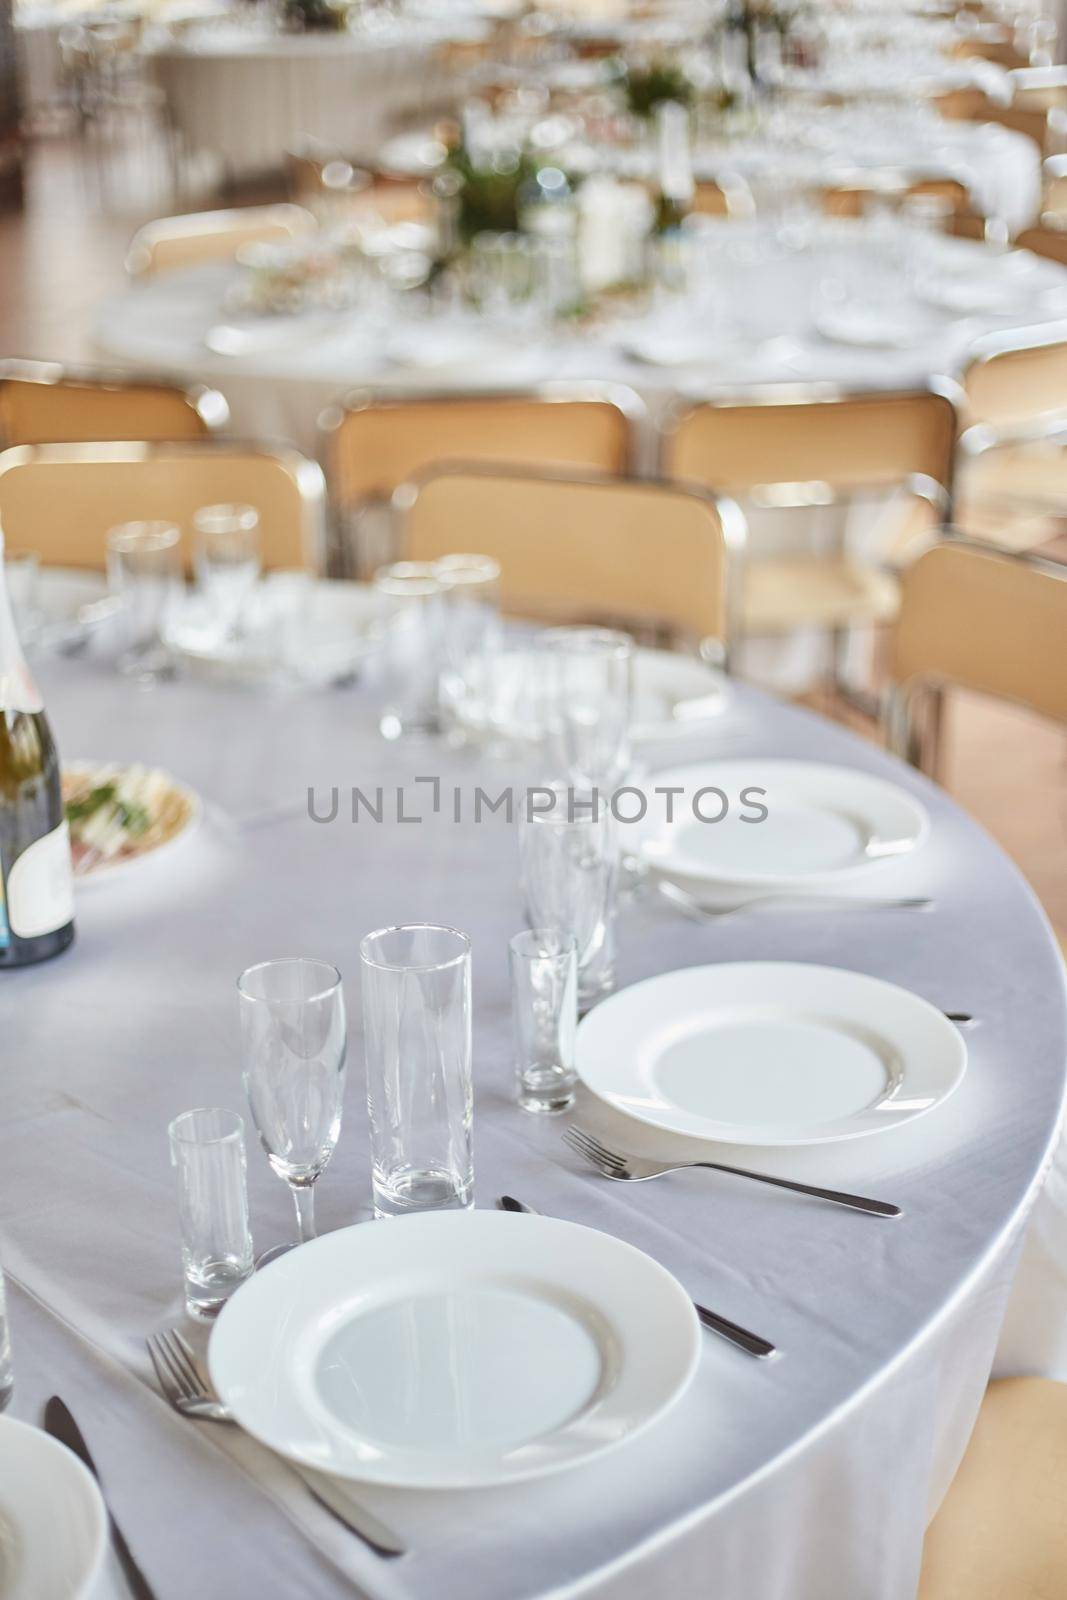 Table set for an event party or wedding reception. Banquet table design. Festive table setting. Glass and plates on the table by driver-s